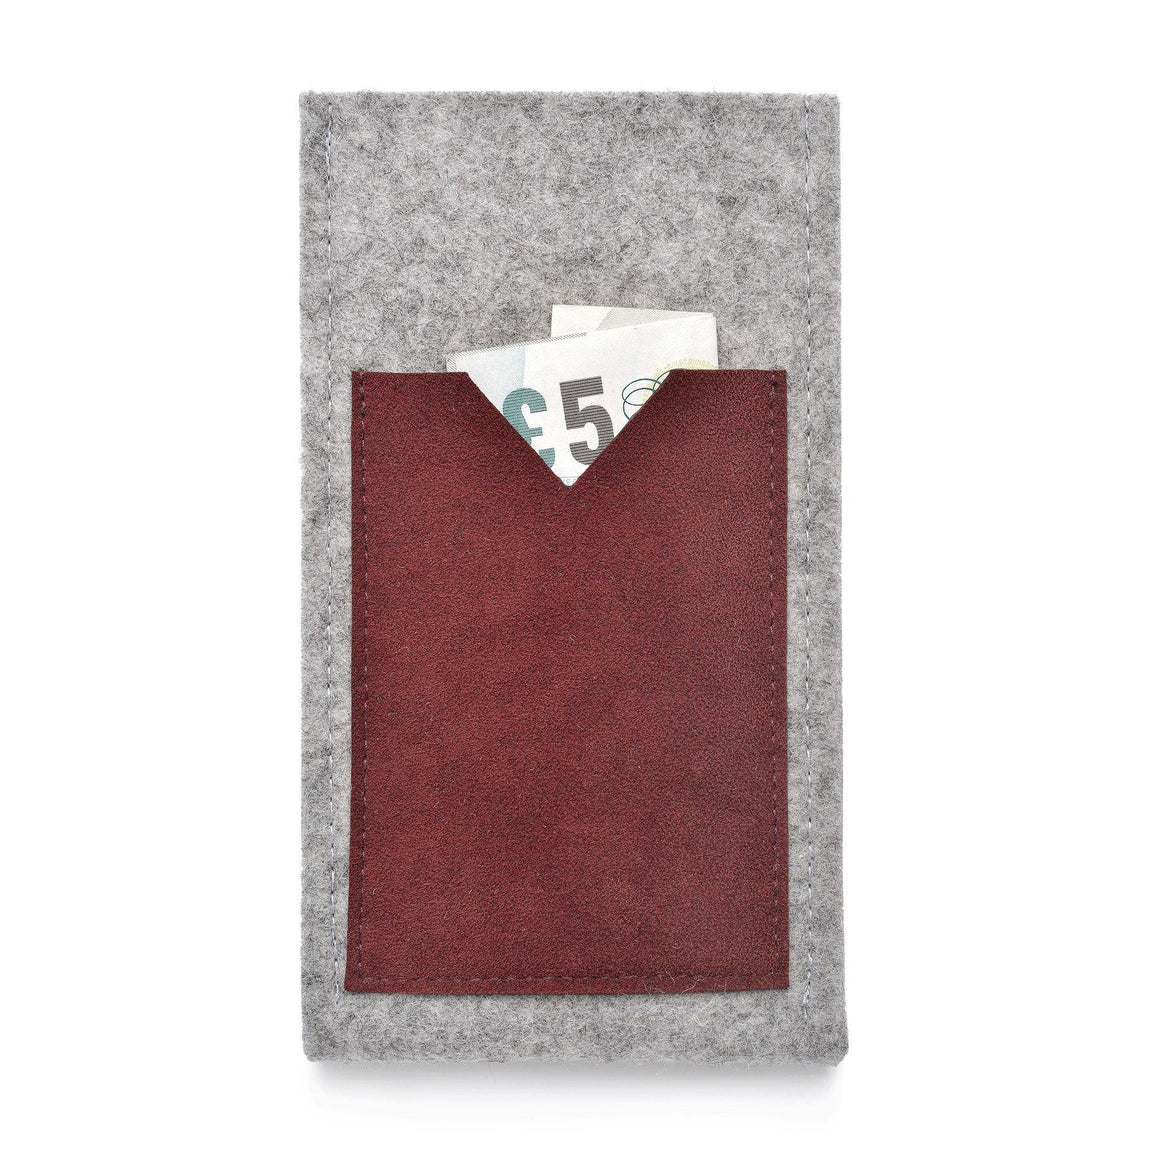 iPhone Wool Felt Cover Grey/Cranberry - Wrappers UK